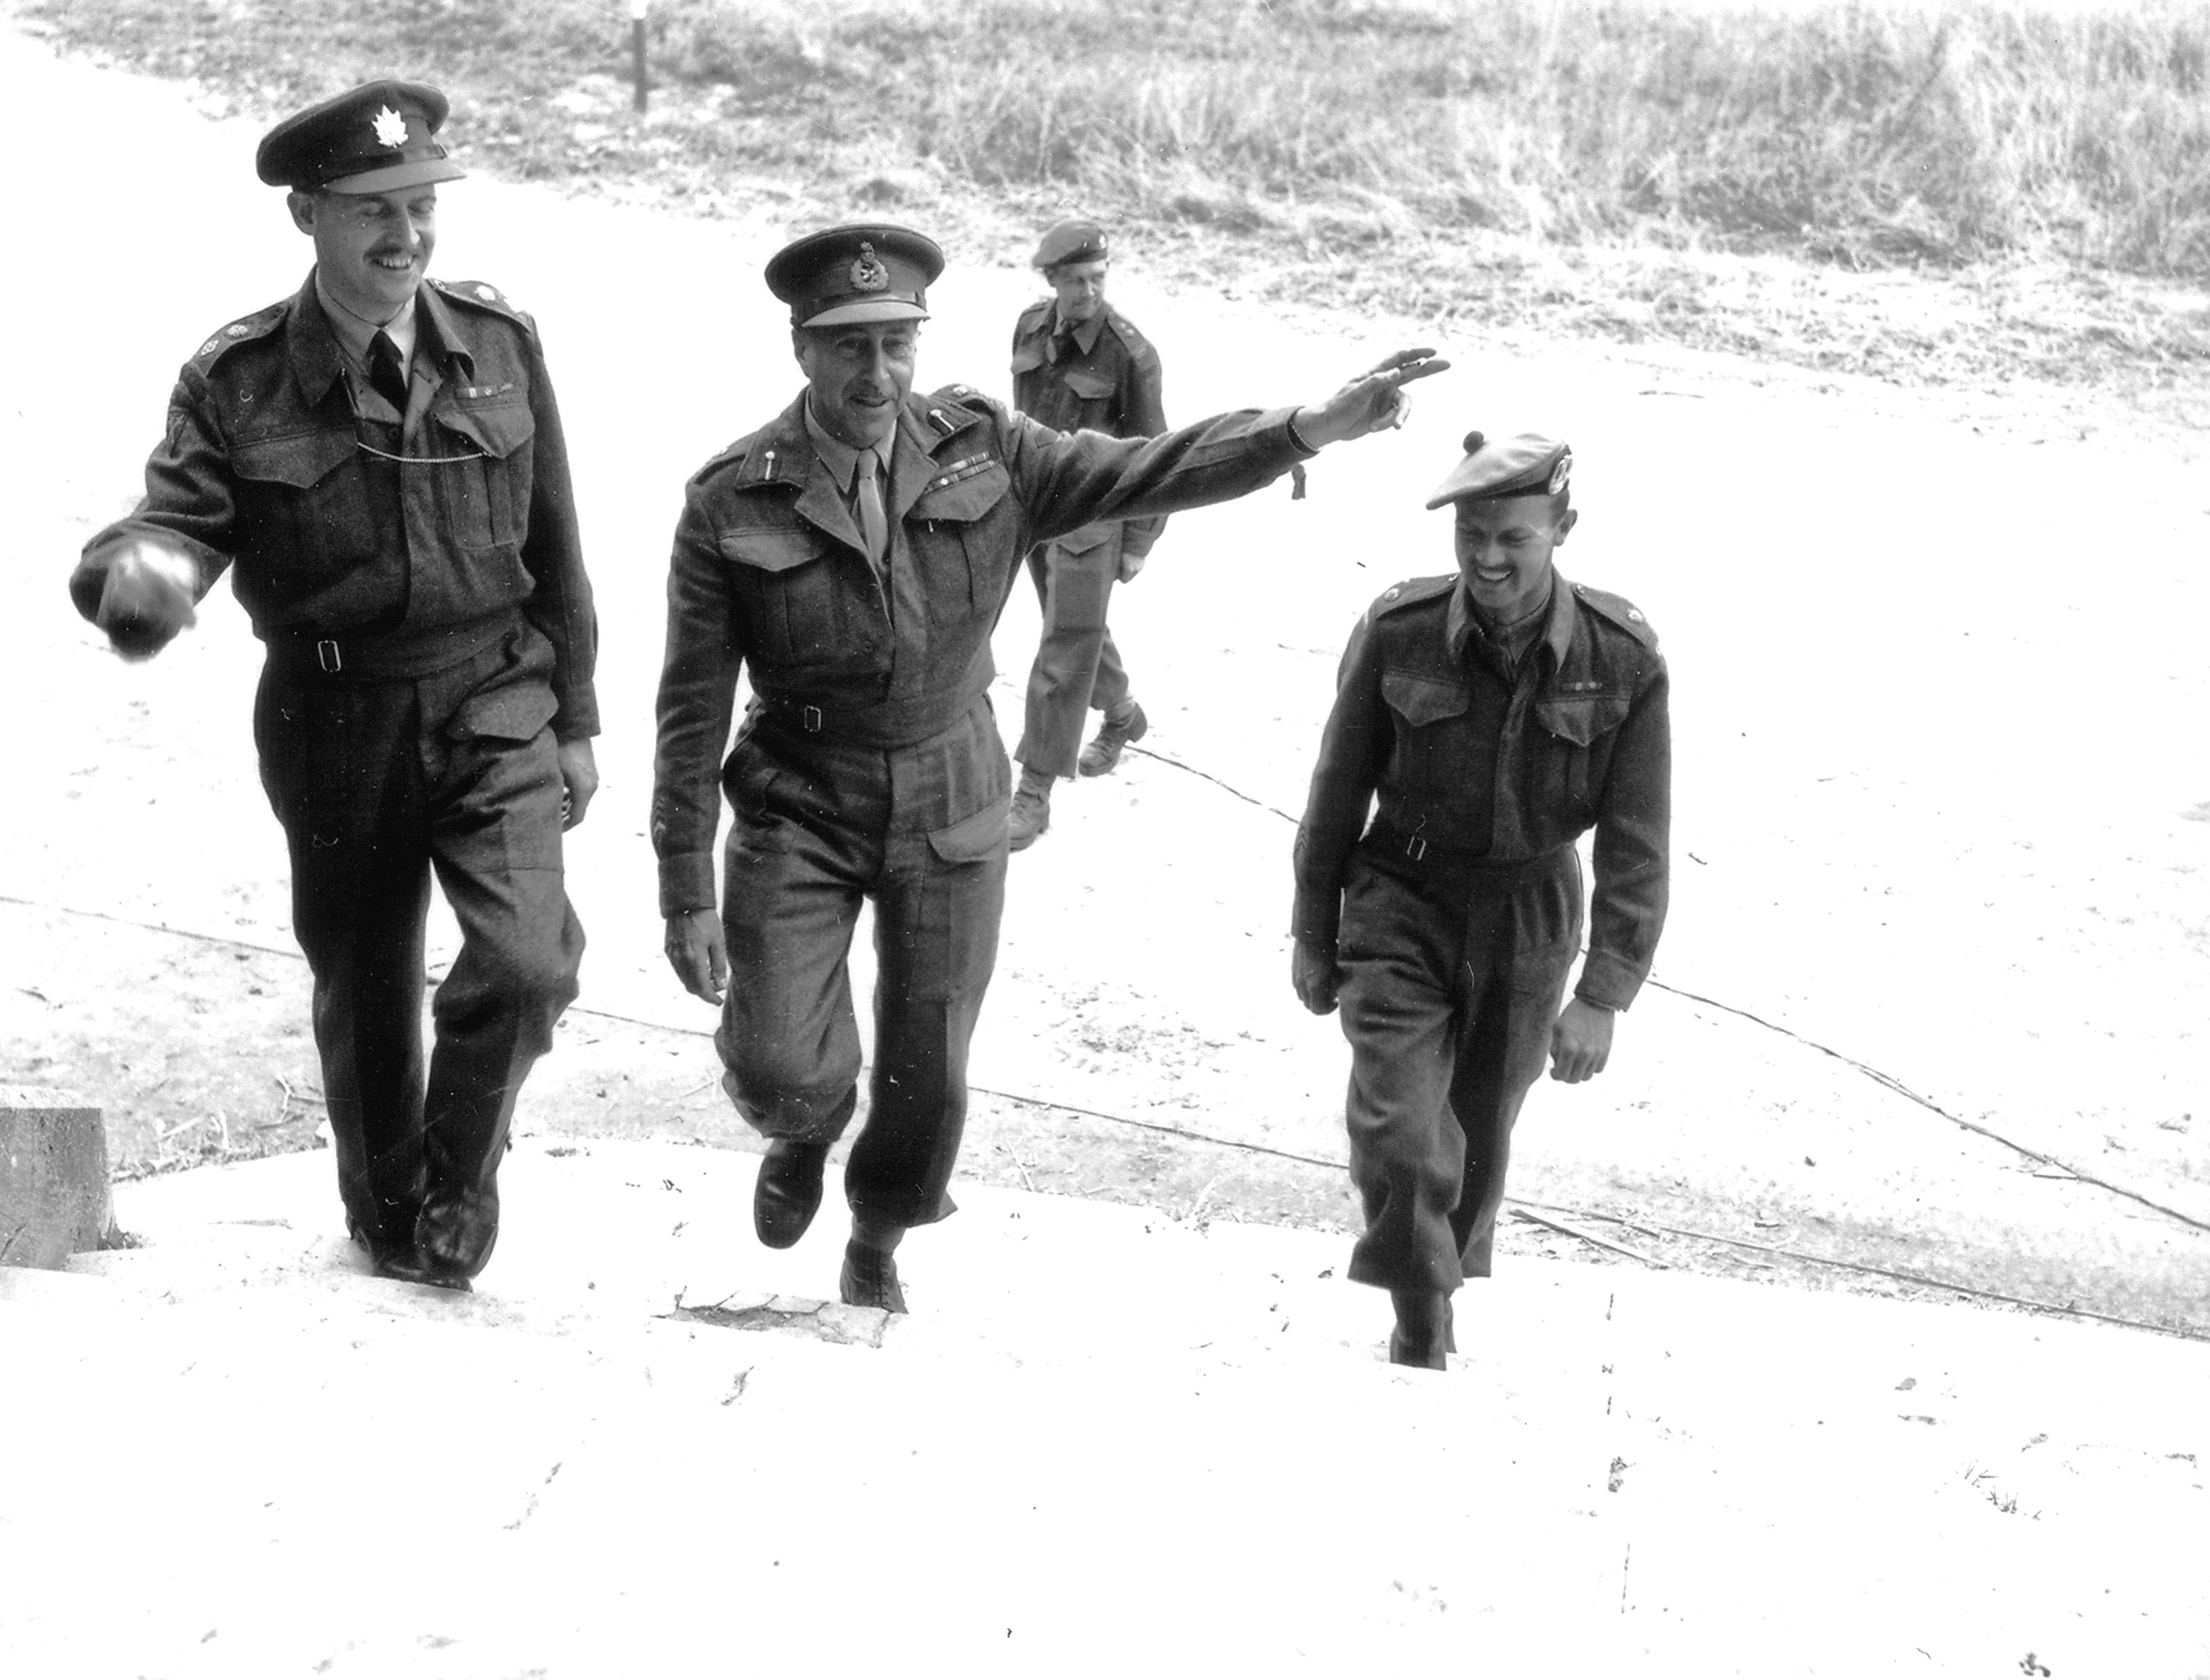 Canadian officers enter Château de Rots, Normandy, France. Left to right they are Colonel Richard S Malone, Lt General Henry Crerar (Commander, 1st Canadian Army) and Major Austin.